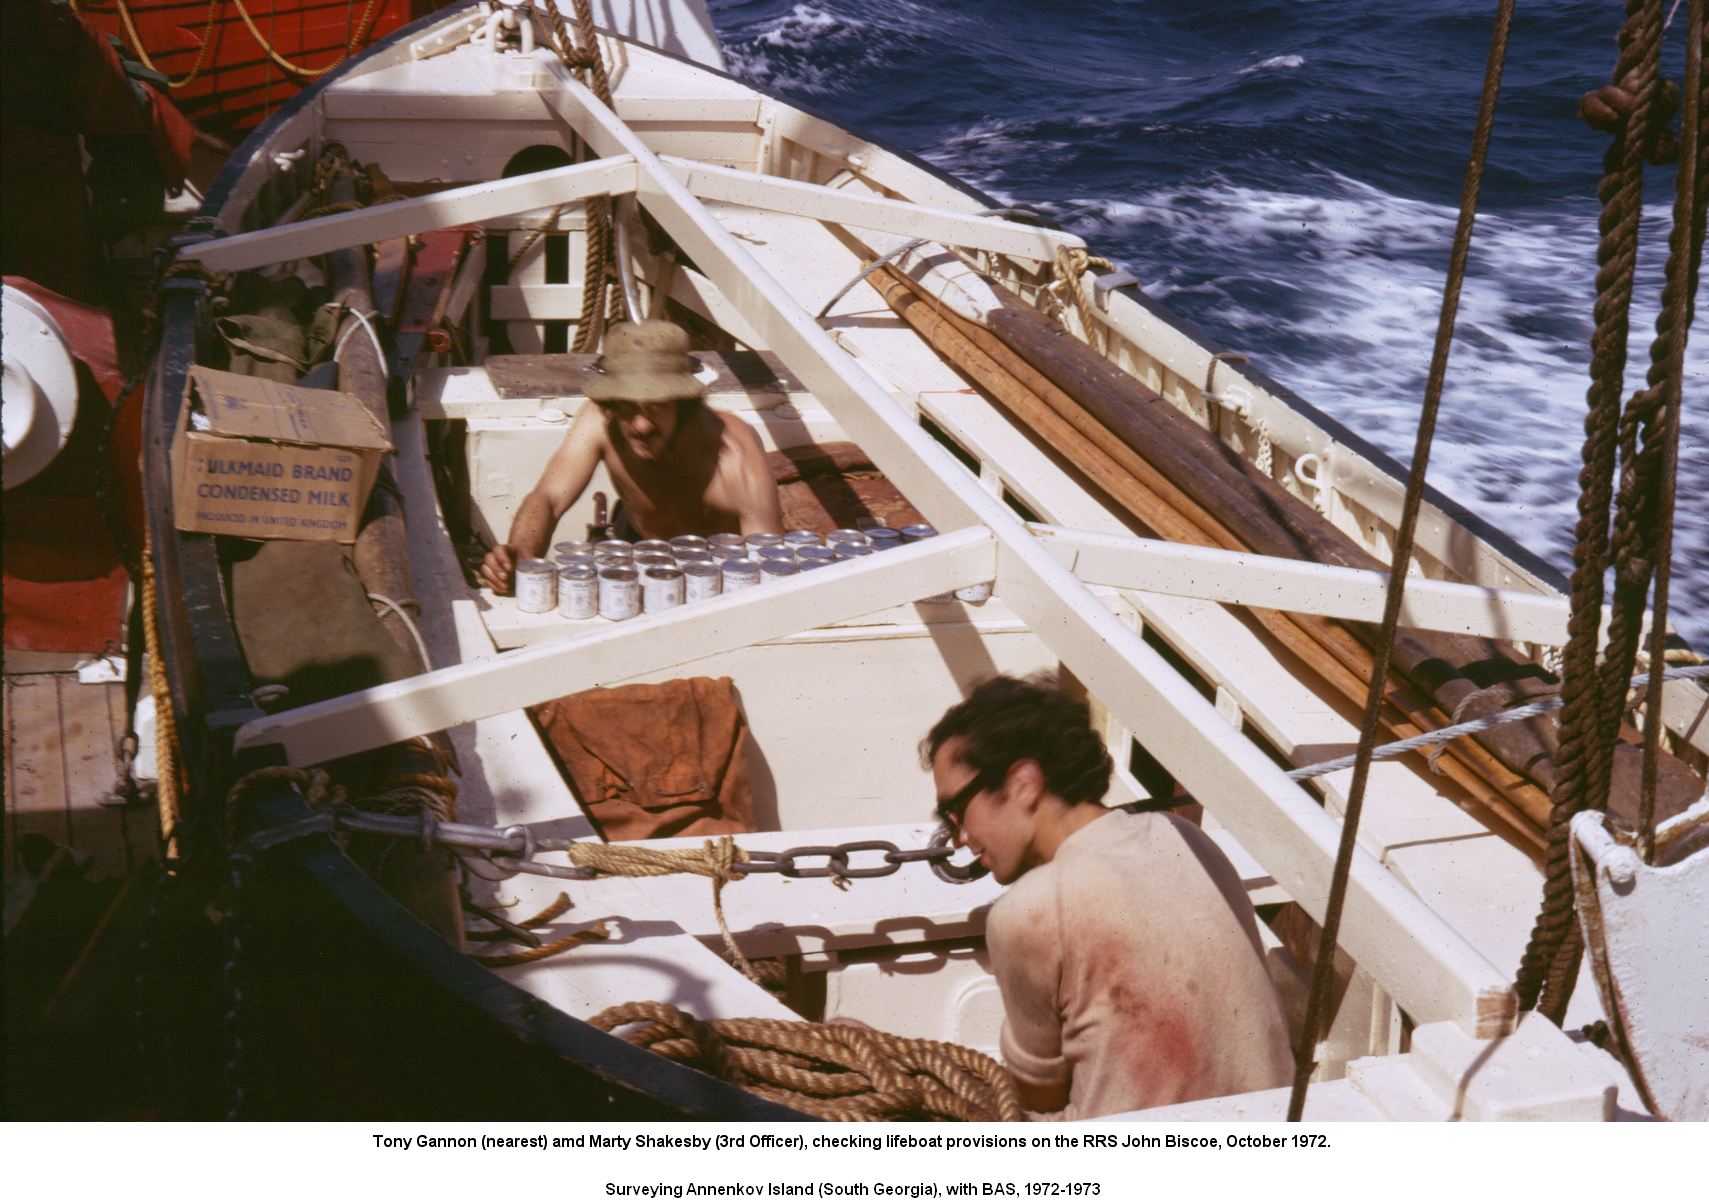 Checking lifeboat provisions on the RRS John Biscoe, October 1972.